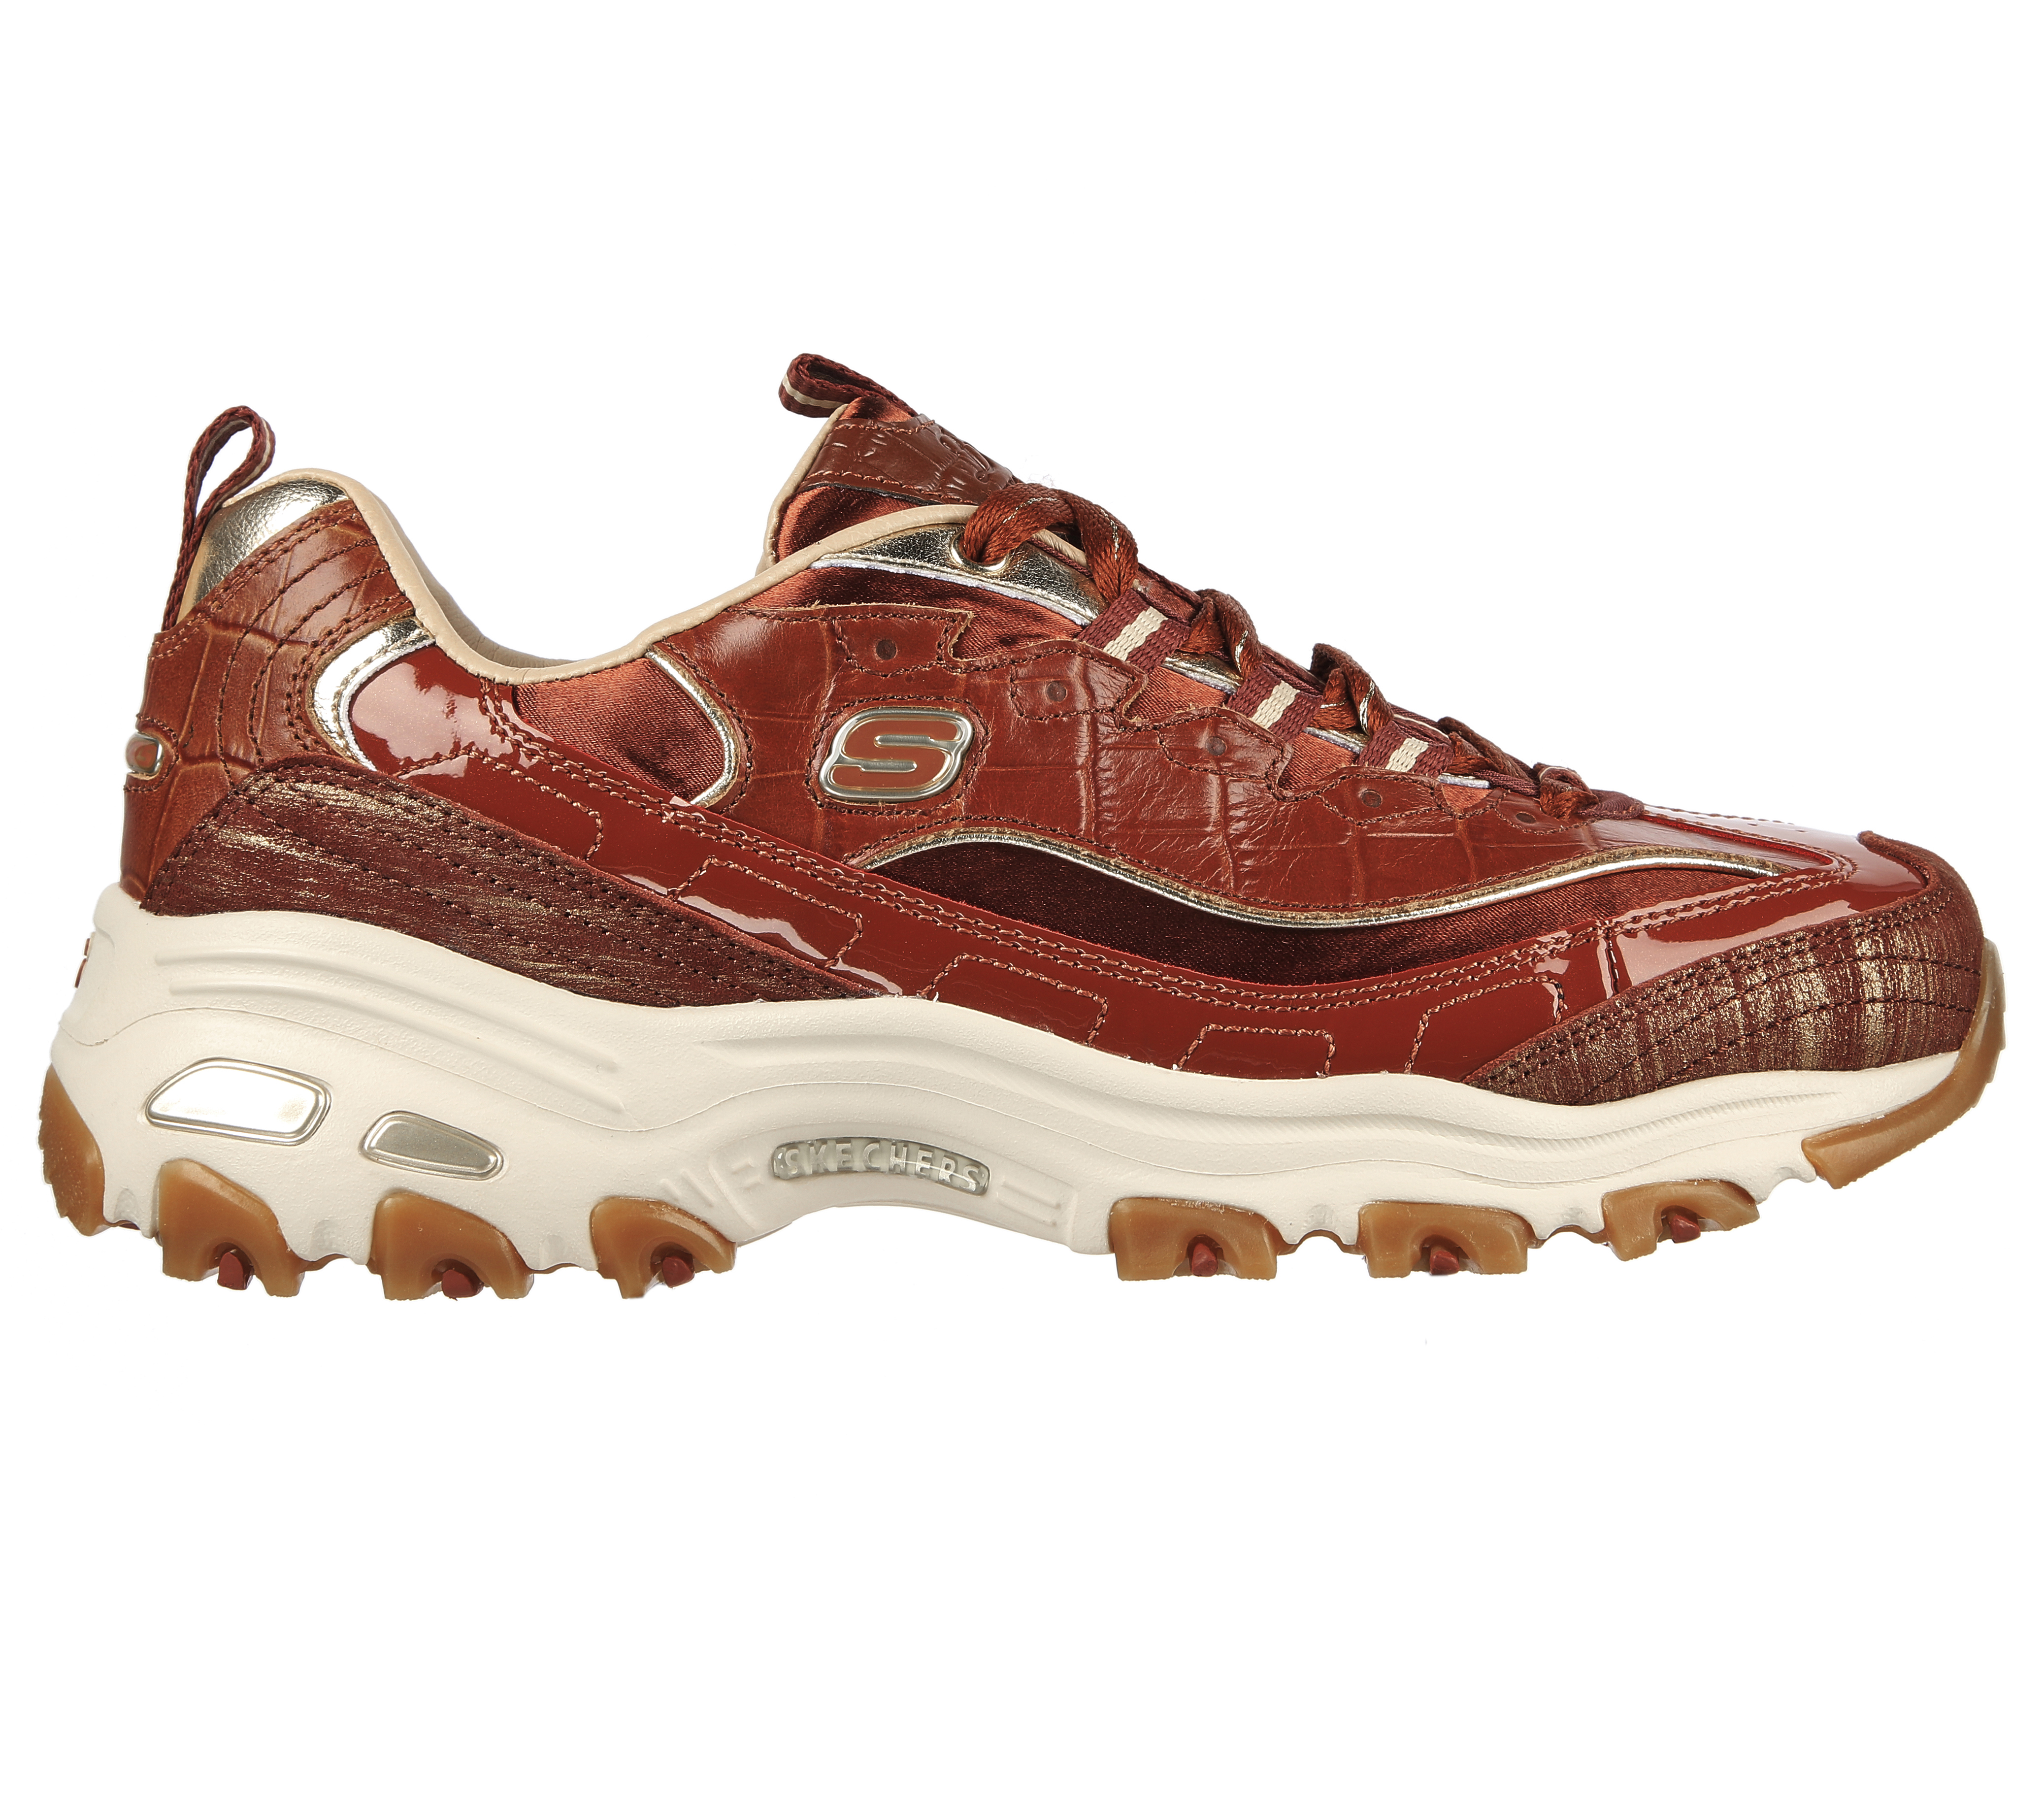 Skechers First Class Collection 